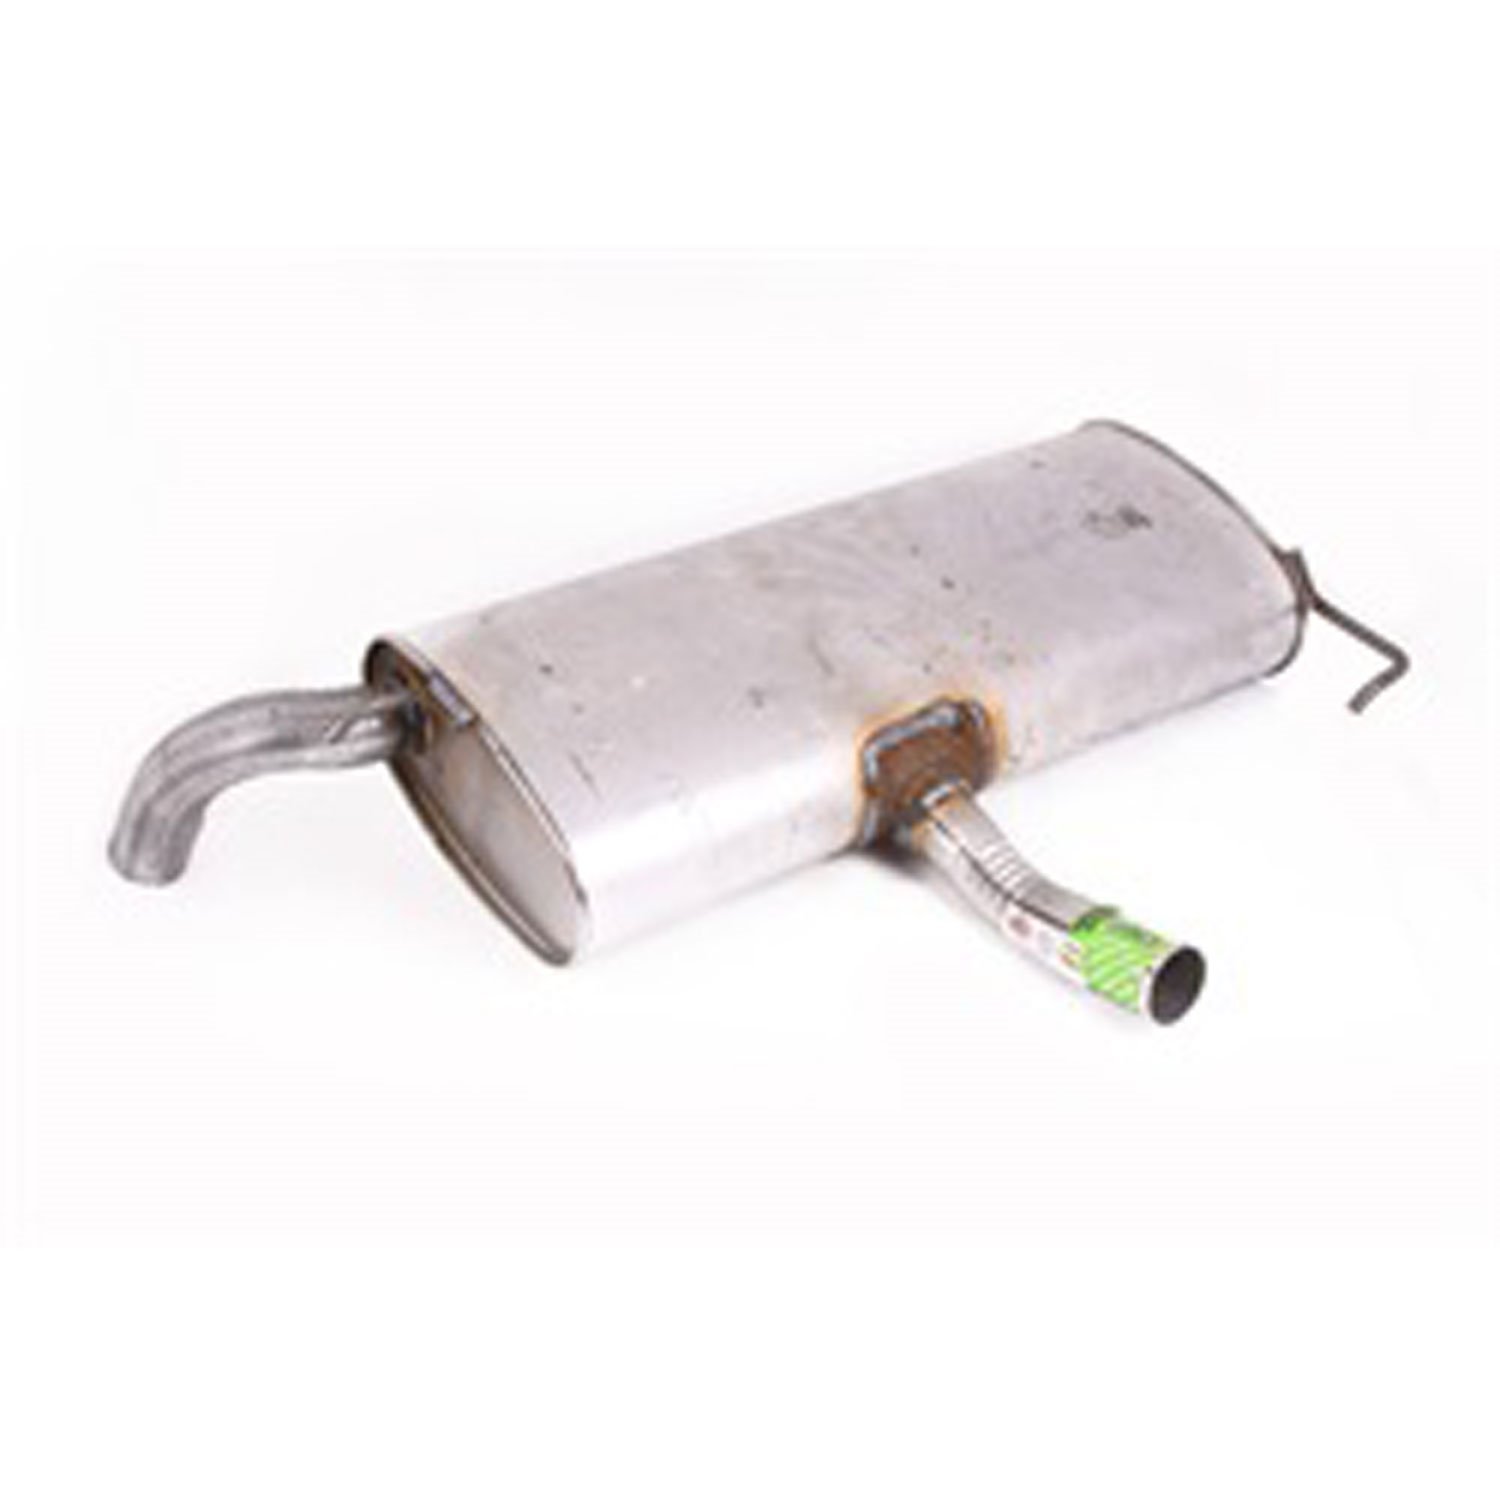 Replacement muffler from Omix-ADA, Fits 07-10 Jeep Compass and Patriots with a 2.0L engine. Also